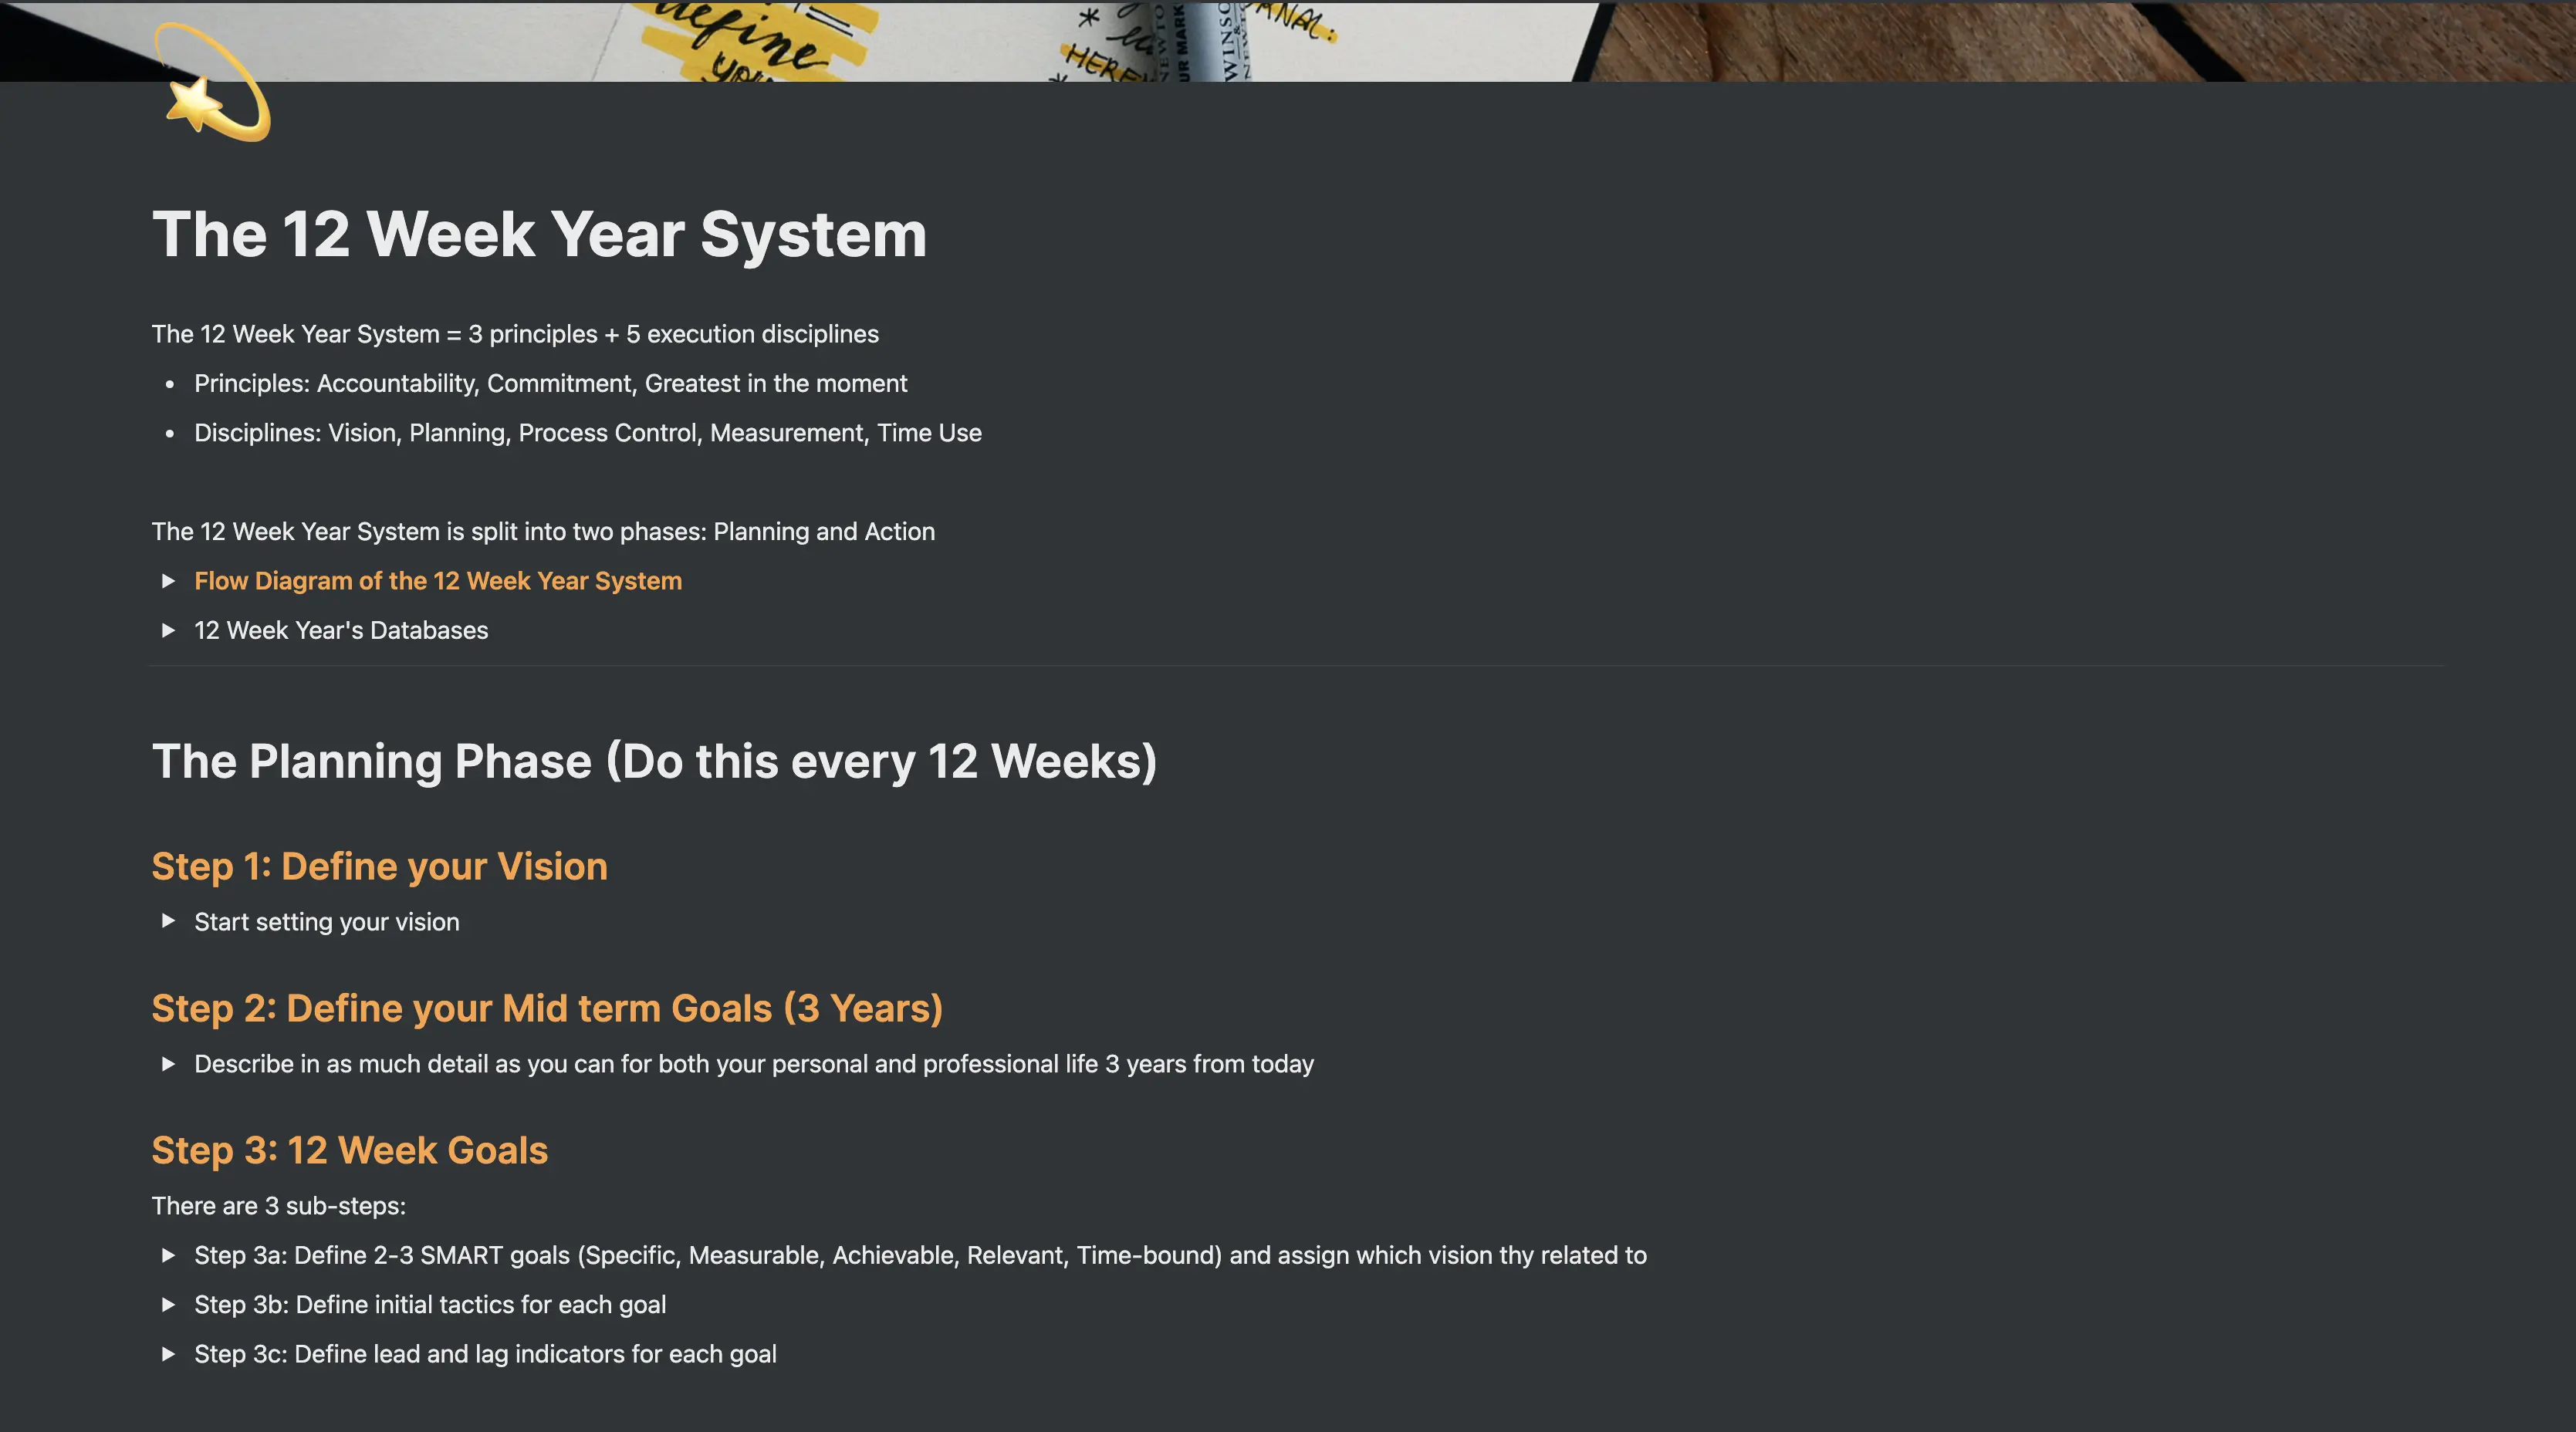 The 12 Week Year System Template image